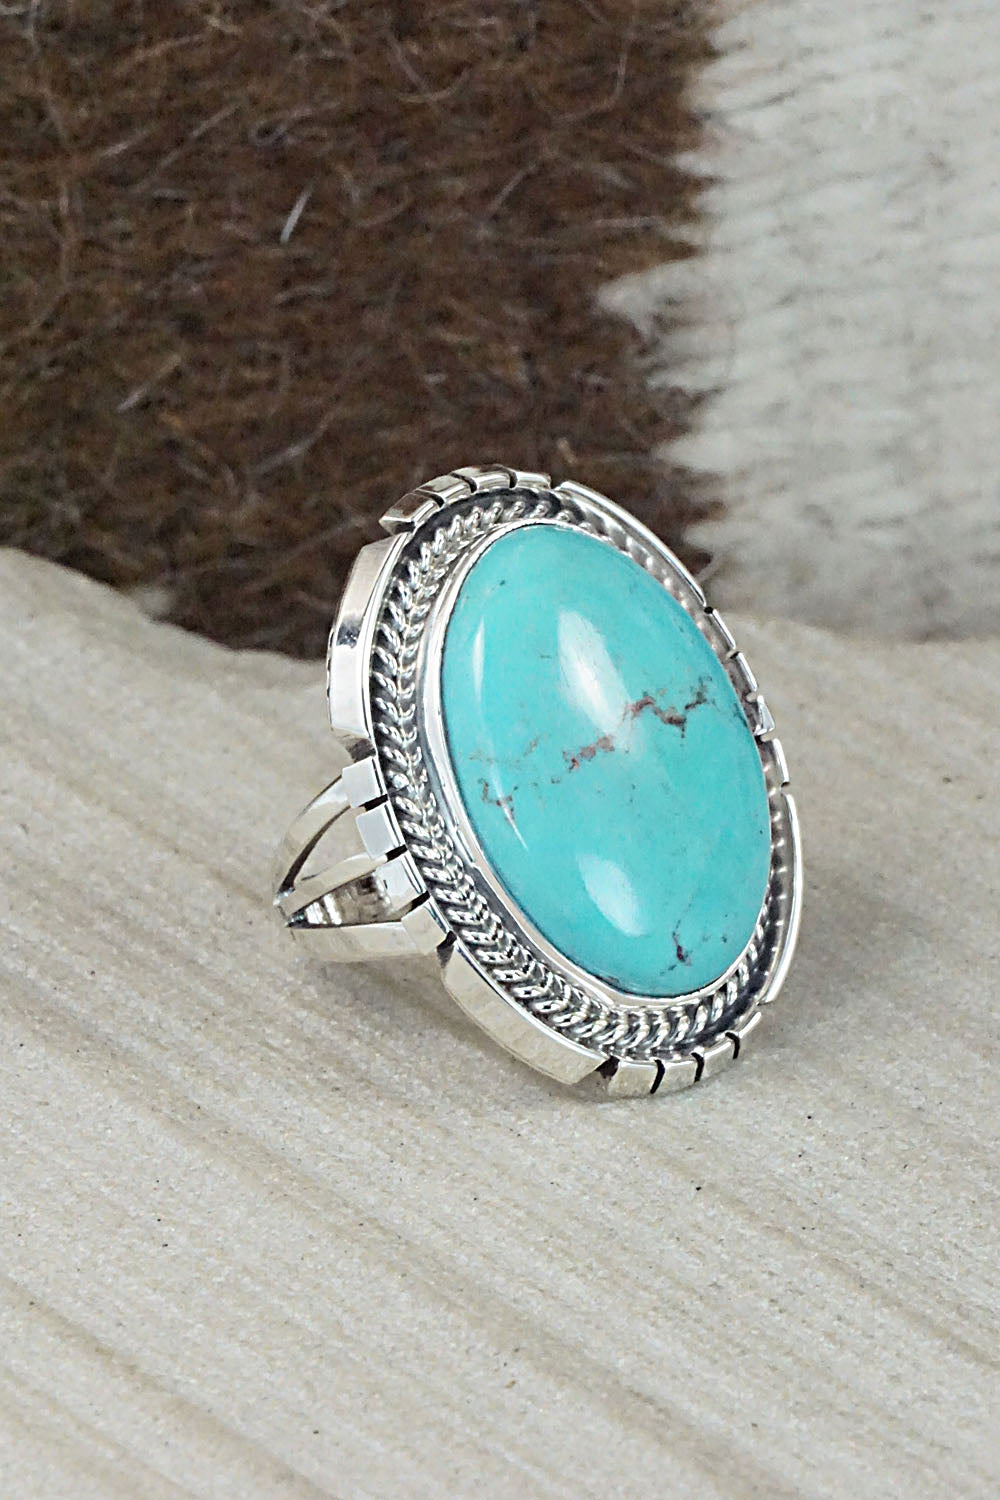 Turquoise & Sterling Silver Ring - Samuel Yellowhair - Size 6